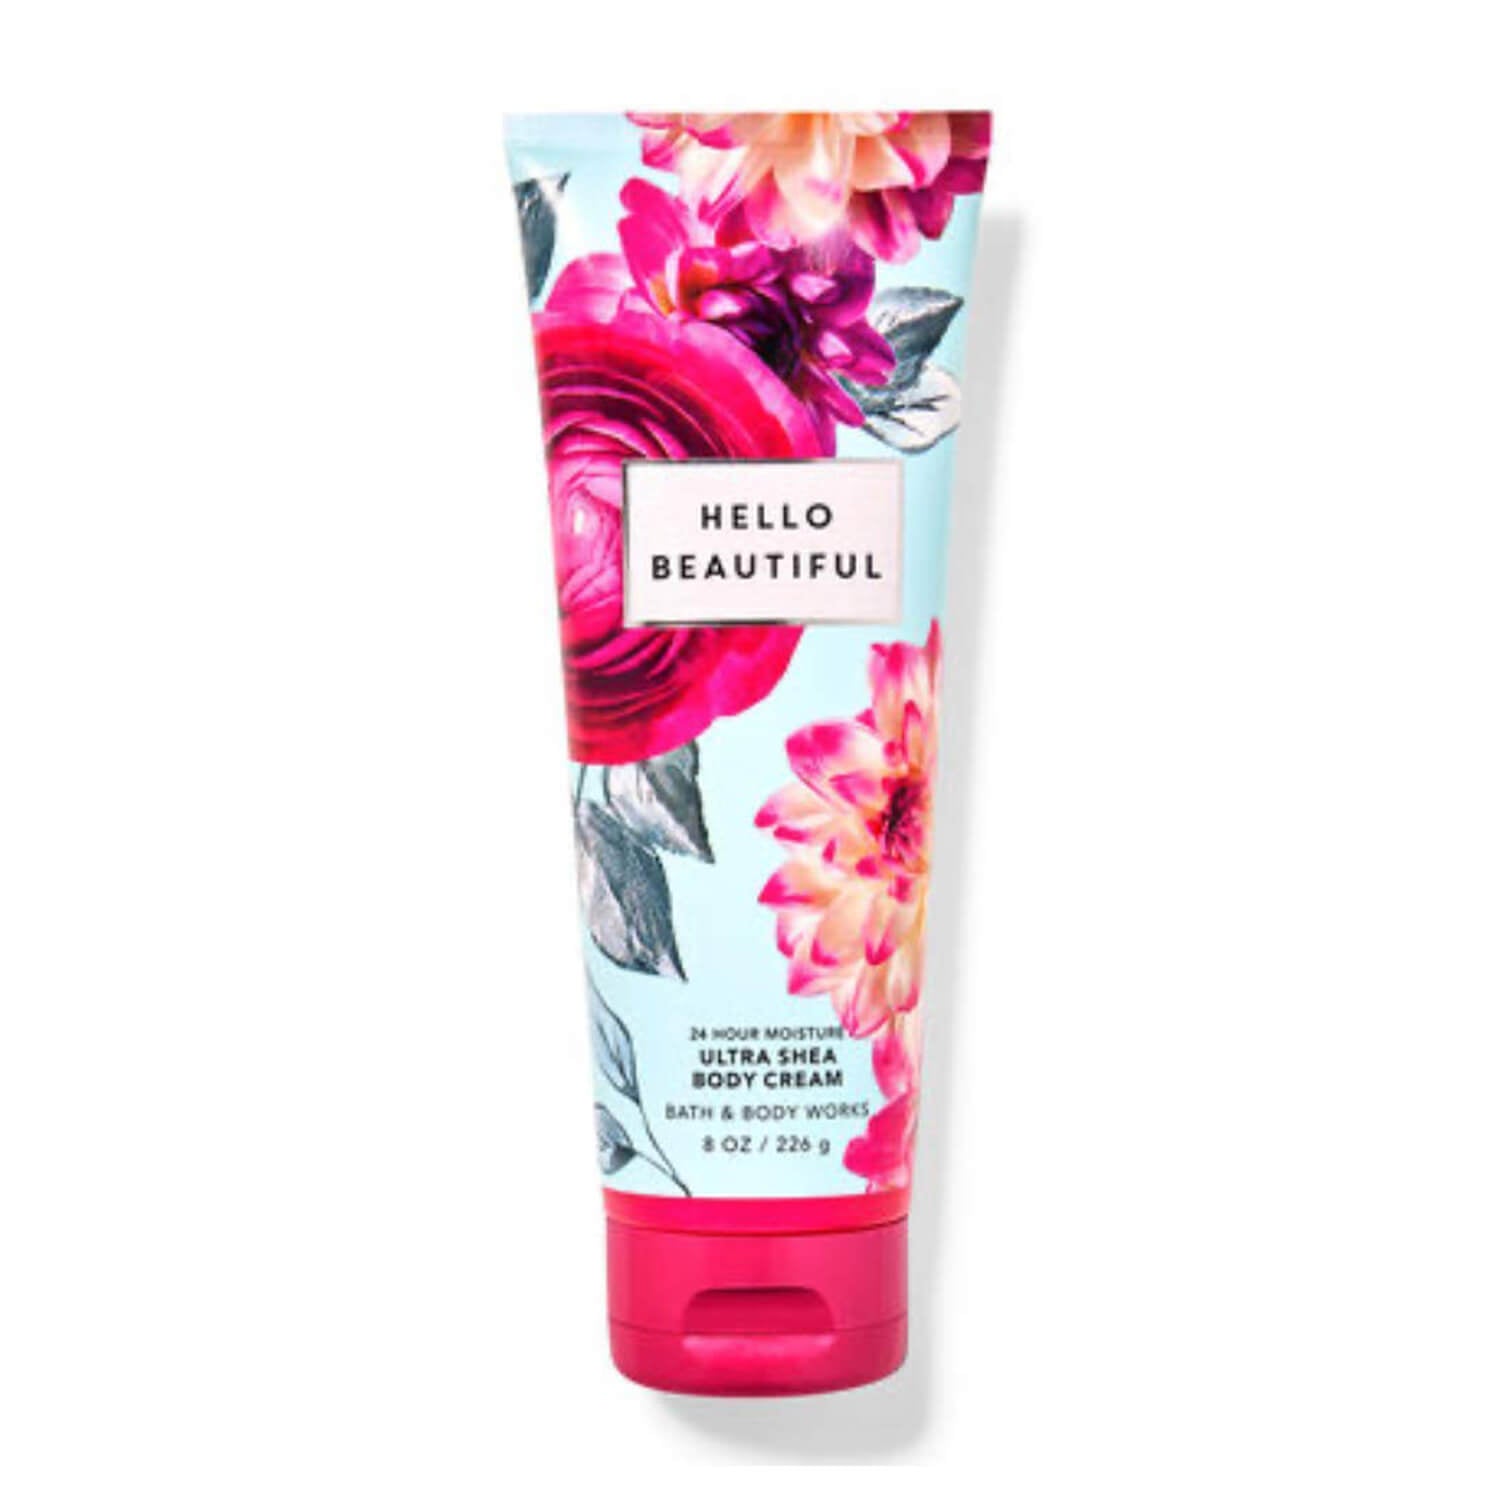 buy bath and body works body cream in hello beautiful fragrance available for delivery in Pakistan